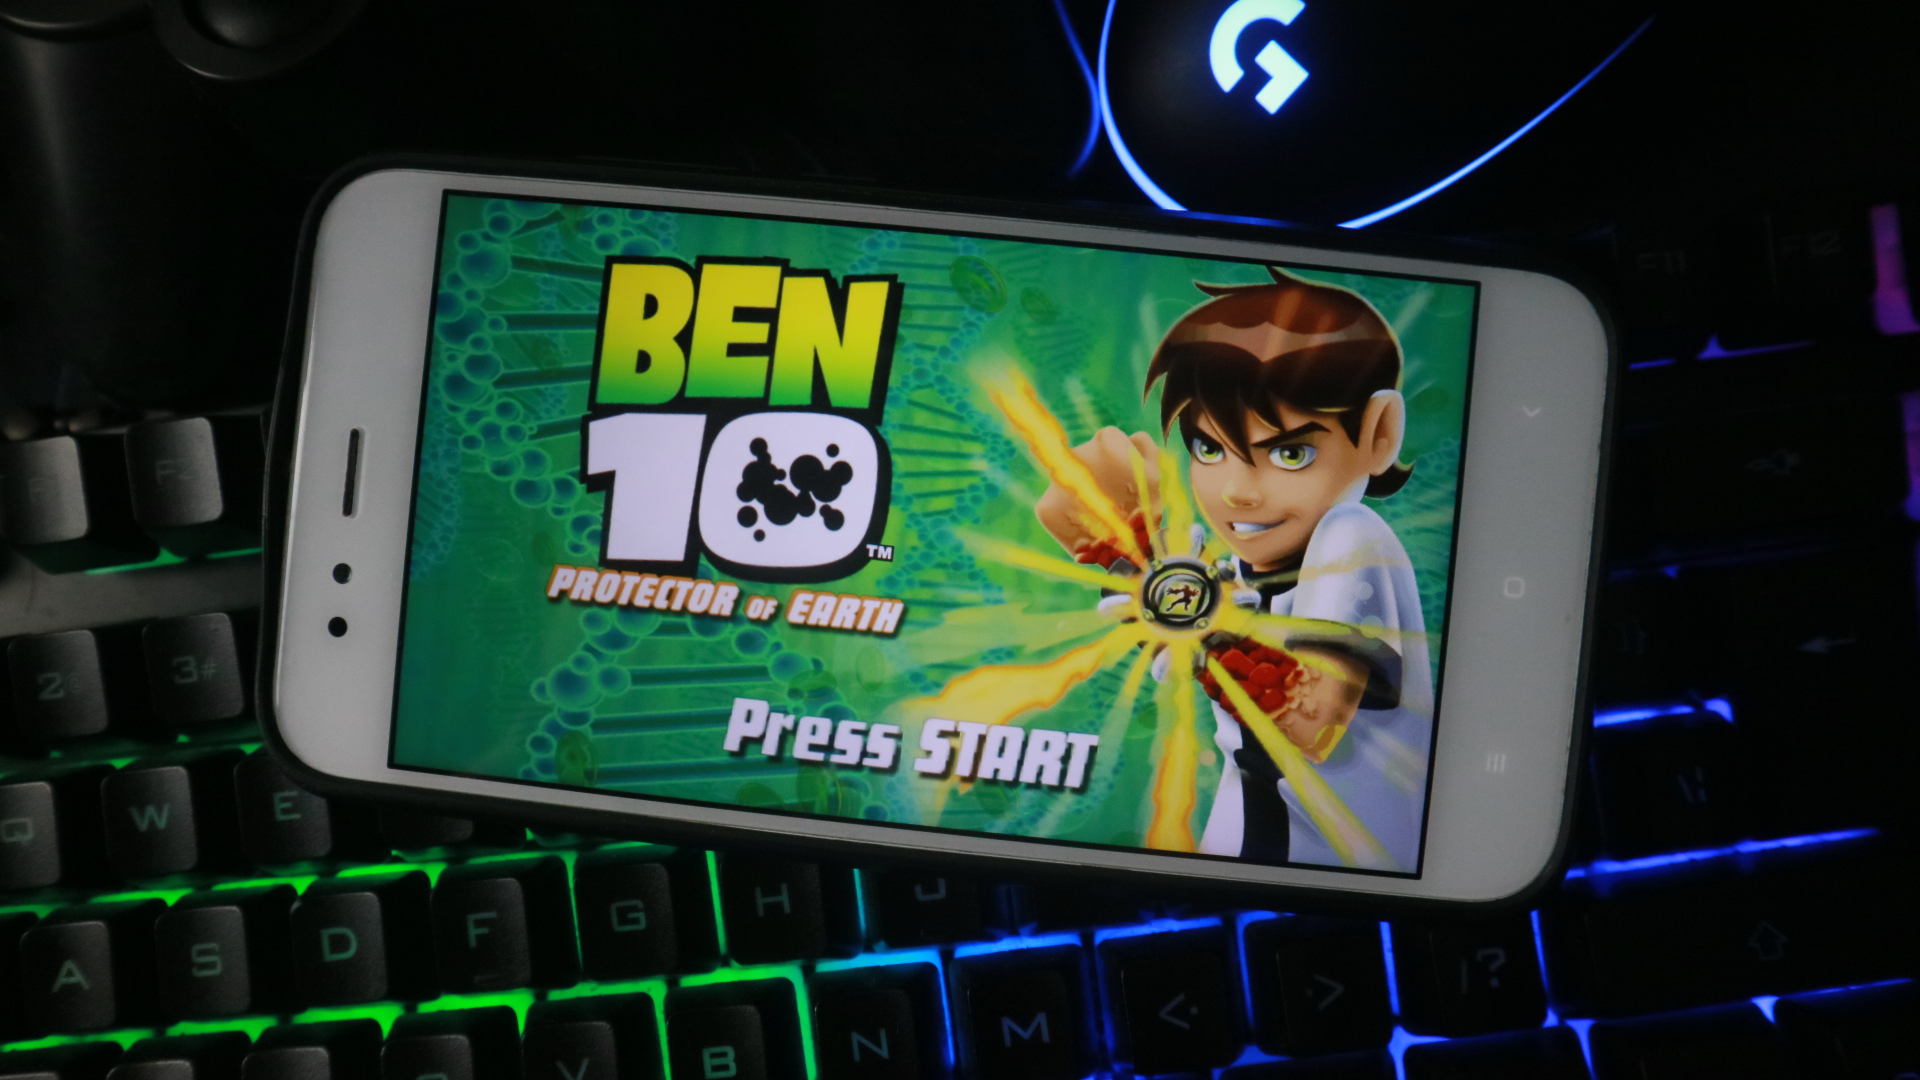 Cheat codes for ben 10 protector of earth ppsspp 2